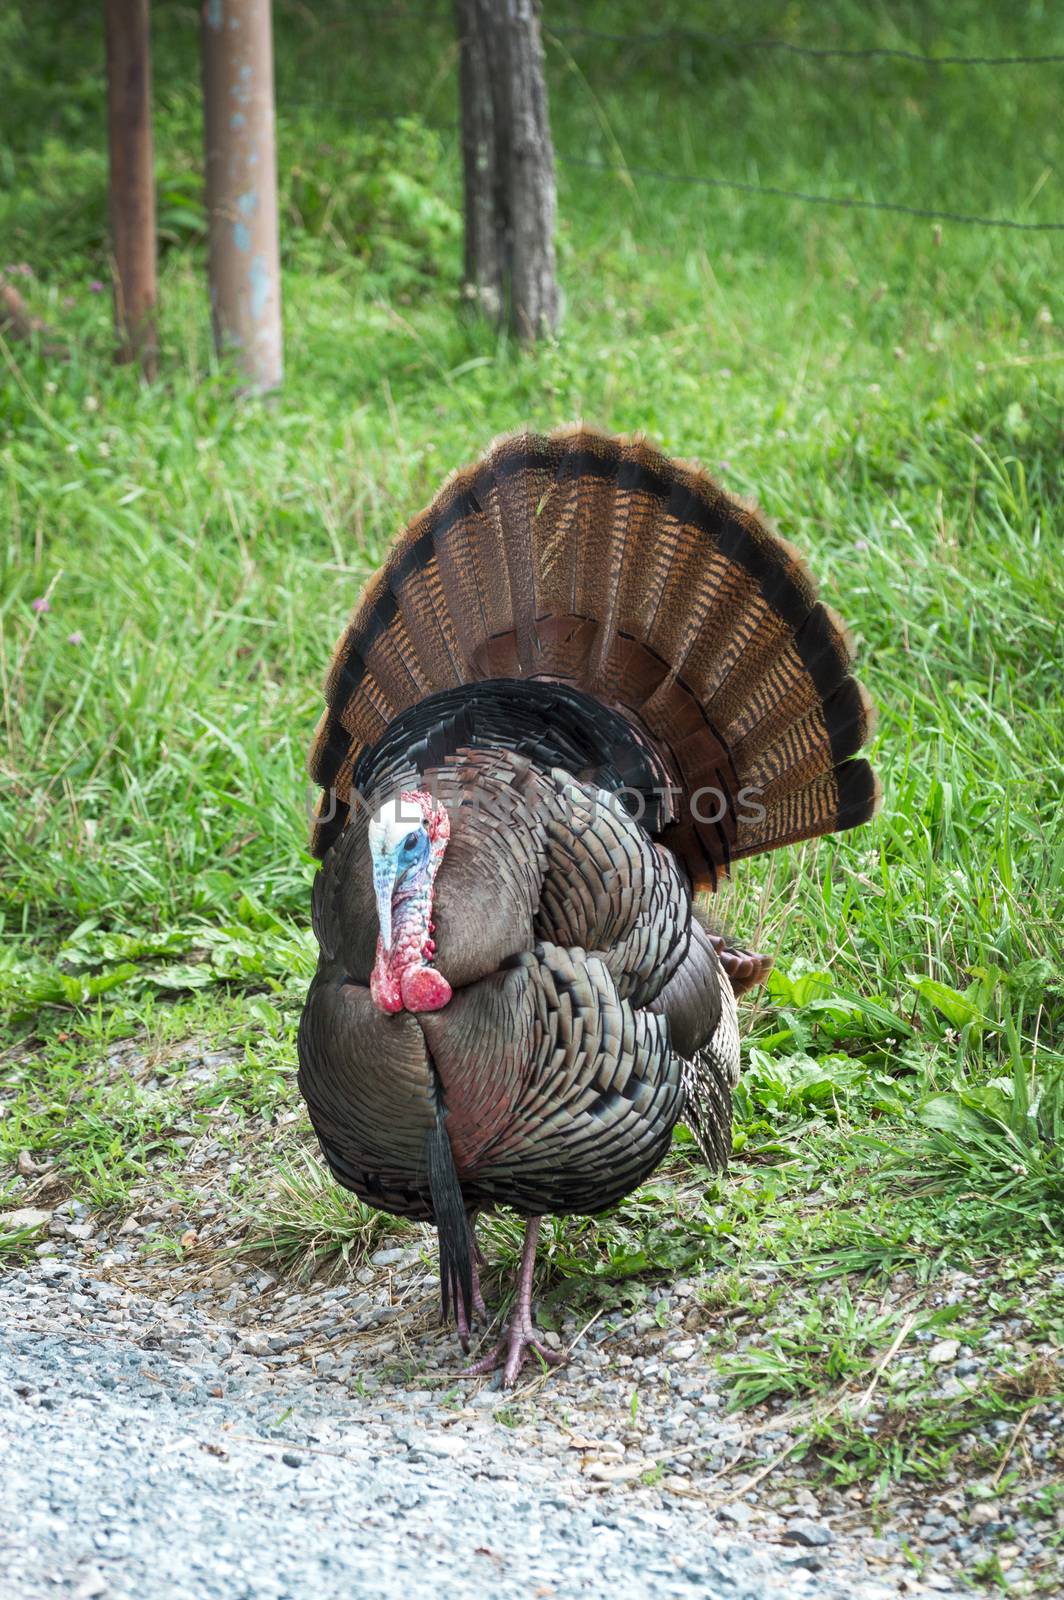 Wild Turkey in Tennessee by stockbuster1